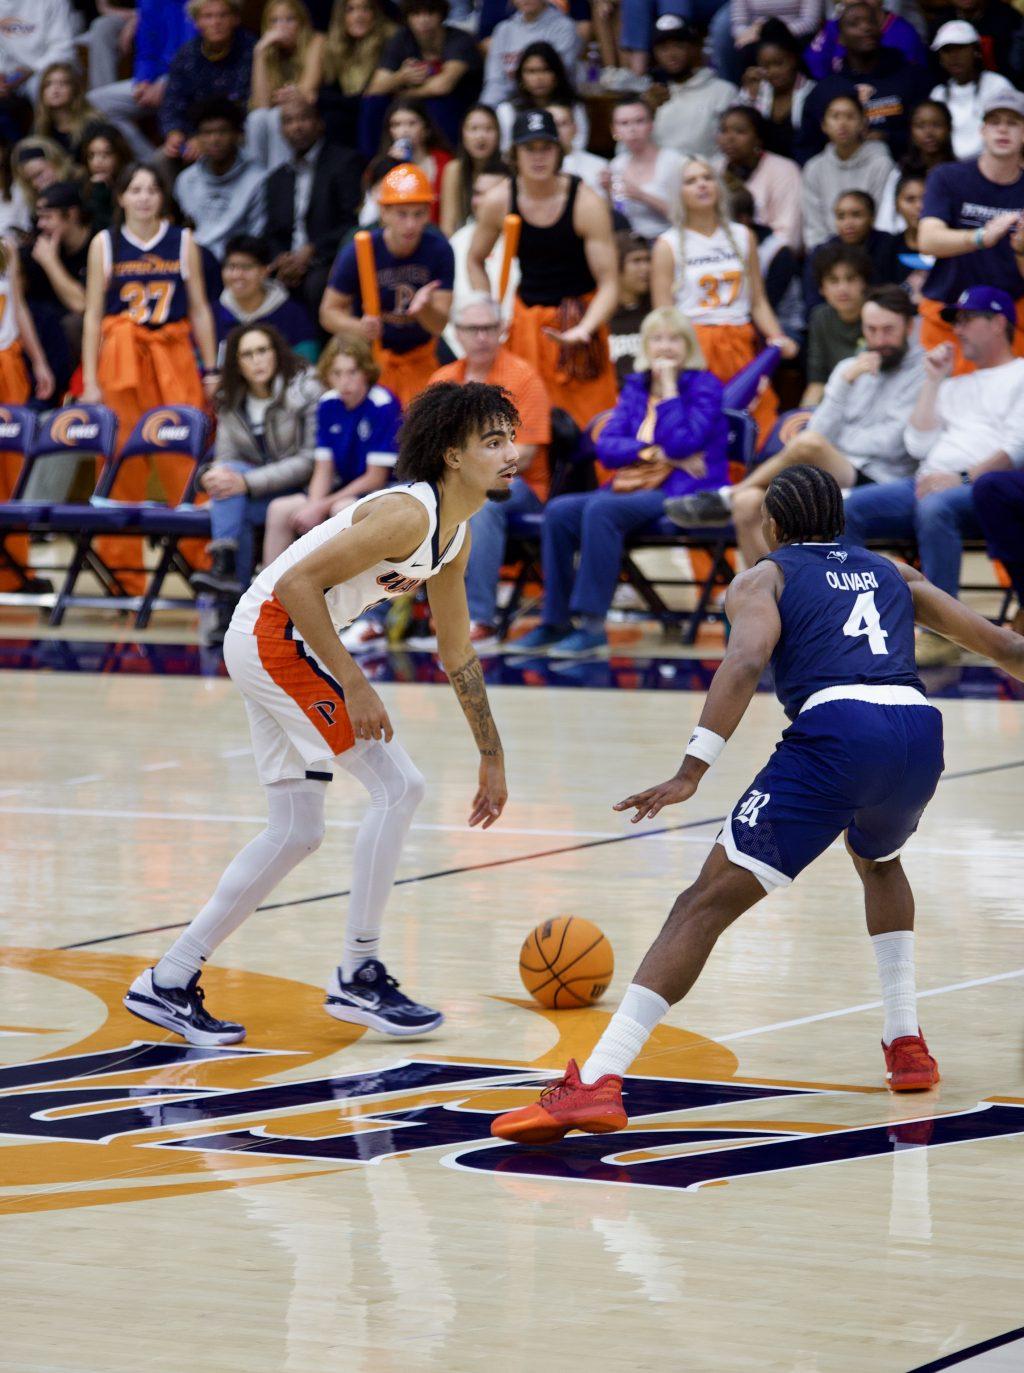 Sophomore guard Houston Mallette brings up the ball versus Rice on Nov. 7 at Firestone Fieldhouse. Mallette said the team responded well to adversity and stuck together.